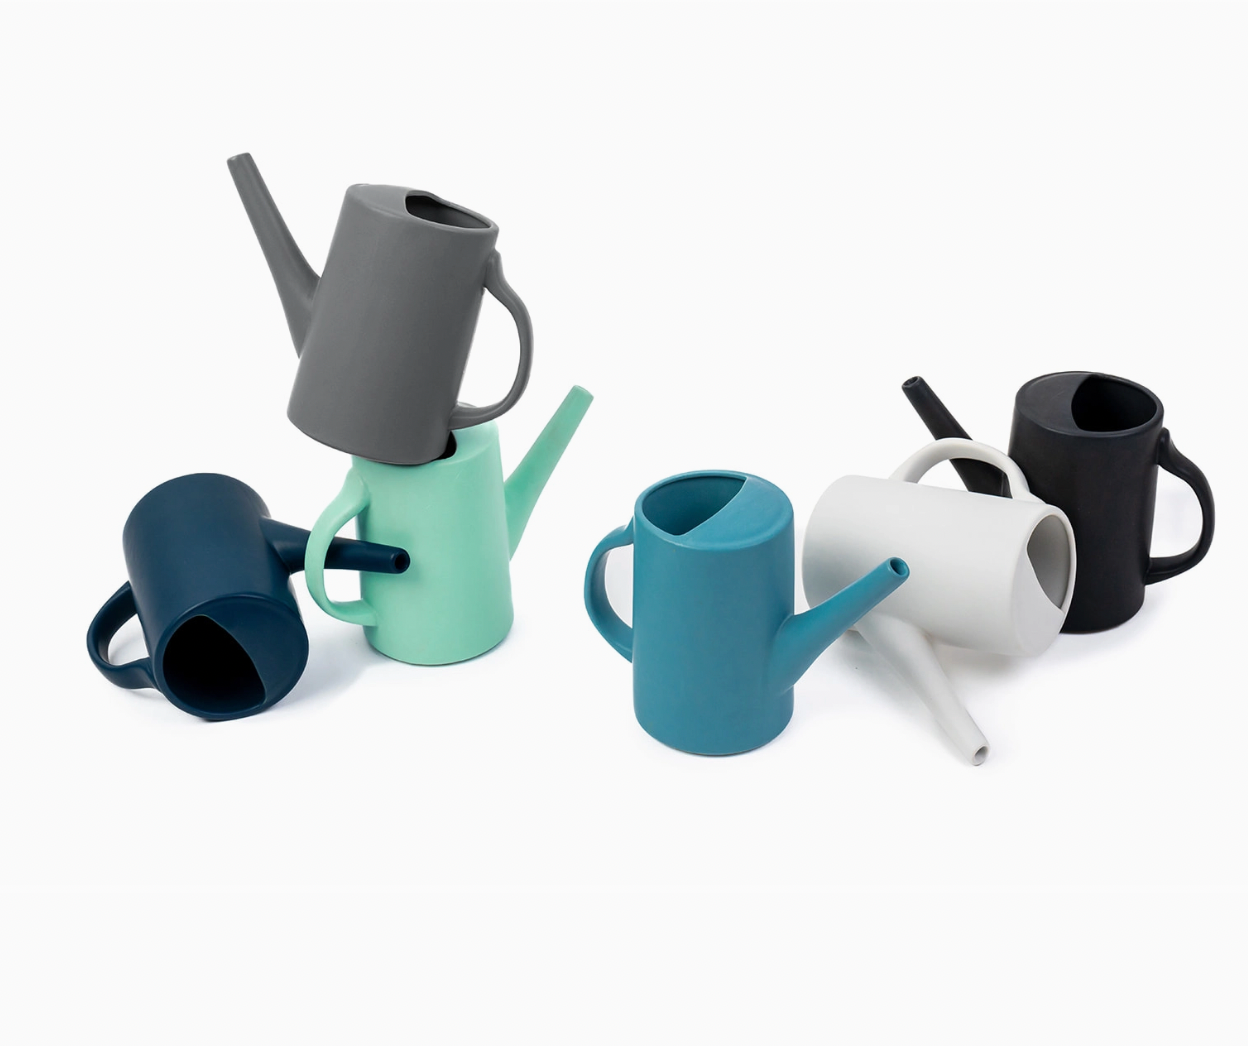 Gemstone Watering Cans